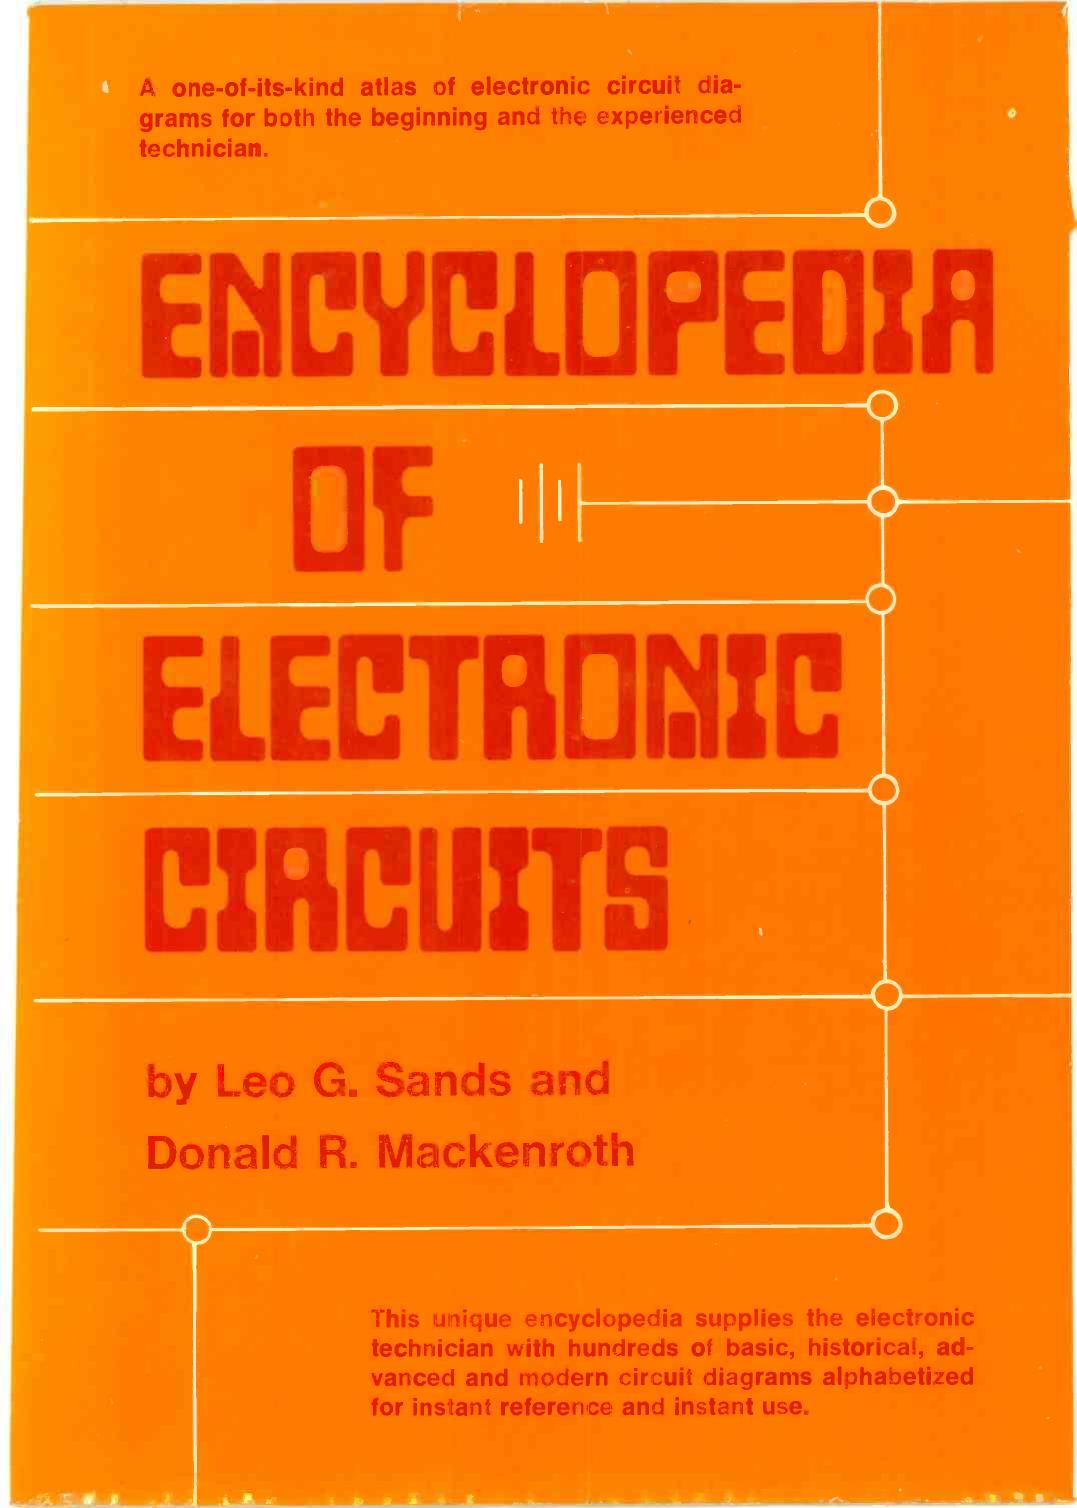 Sands-Encyclopedia-of-Electronic-Circuits-1975 by Unknown